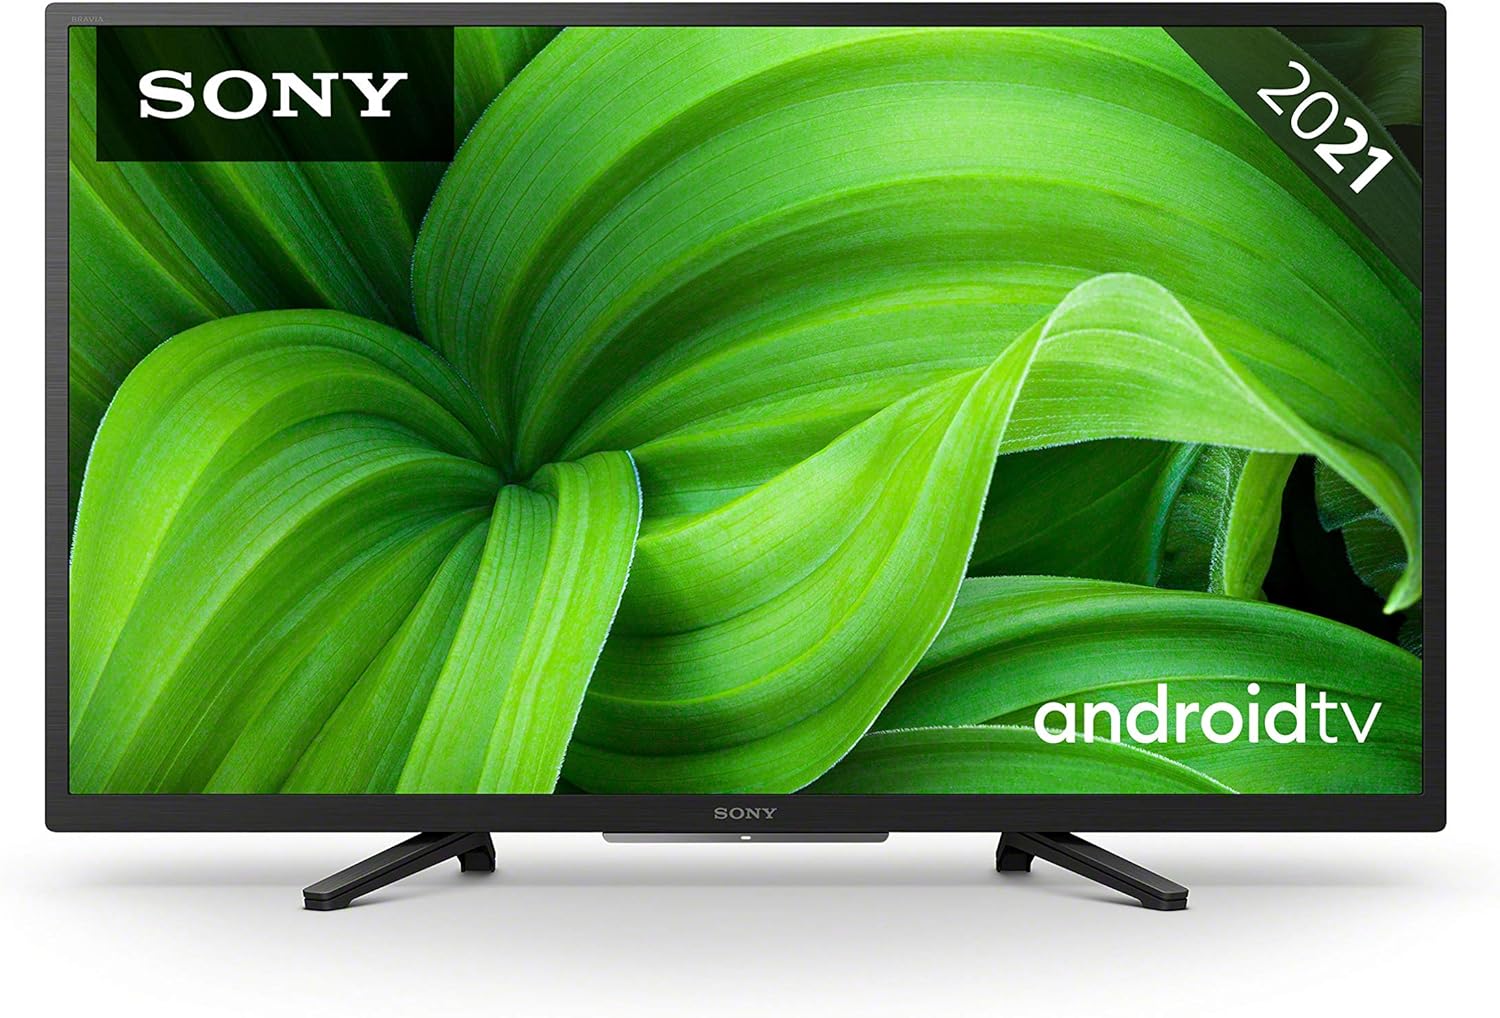 Sony BRAVIA KD - 32W800 - 32 - Inch HD - High Dynamic Range (HDR) - Android TV Black - Amazing Gadgets Outlet